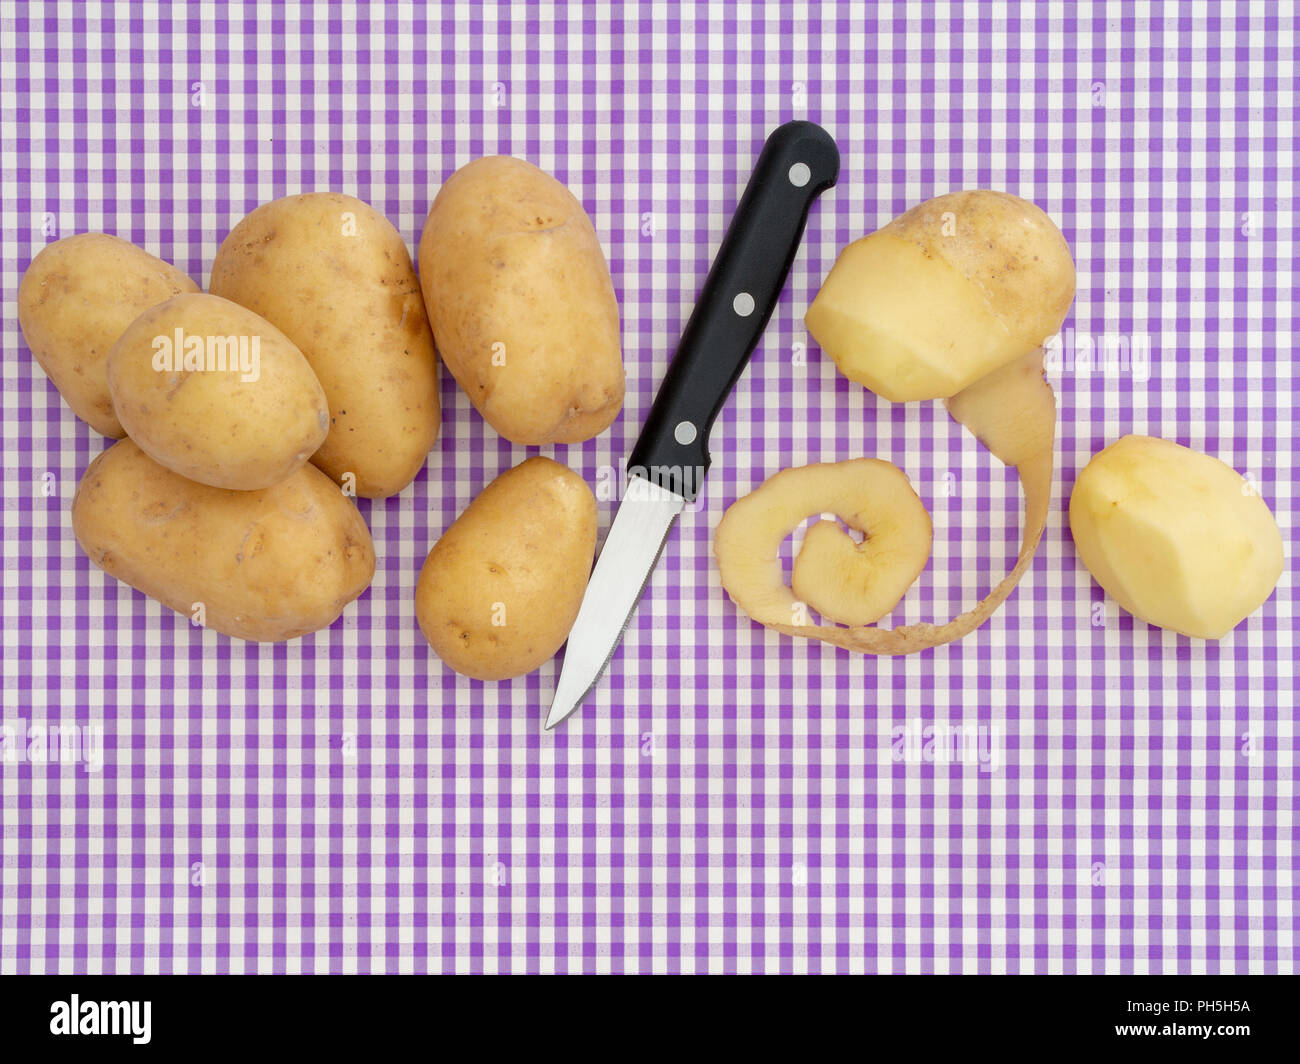 Food preparation, peeling potatoes on purple gingham surface. With knife, overhead view with copyspace. Retro styling. Stock Photo